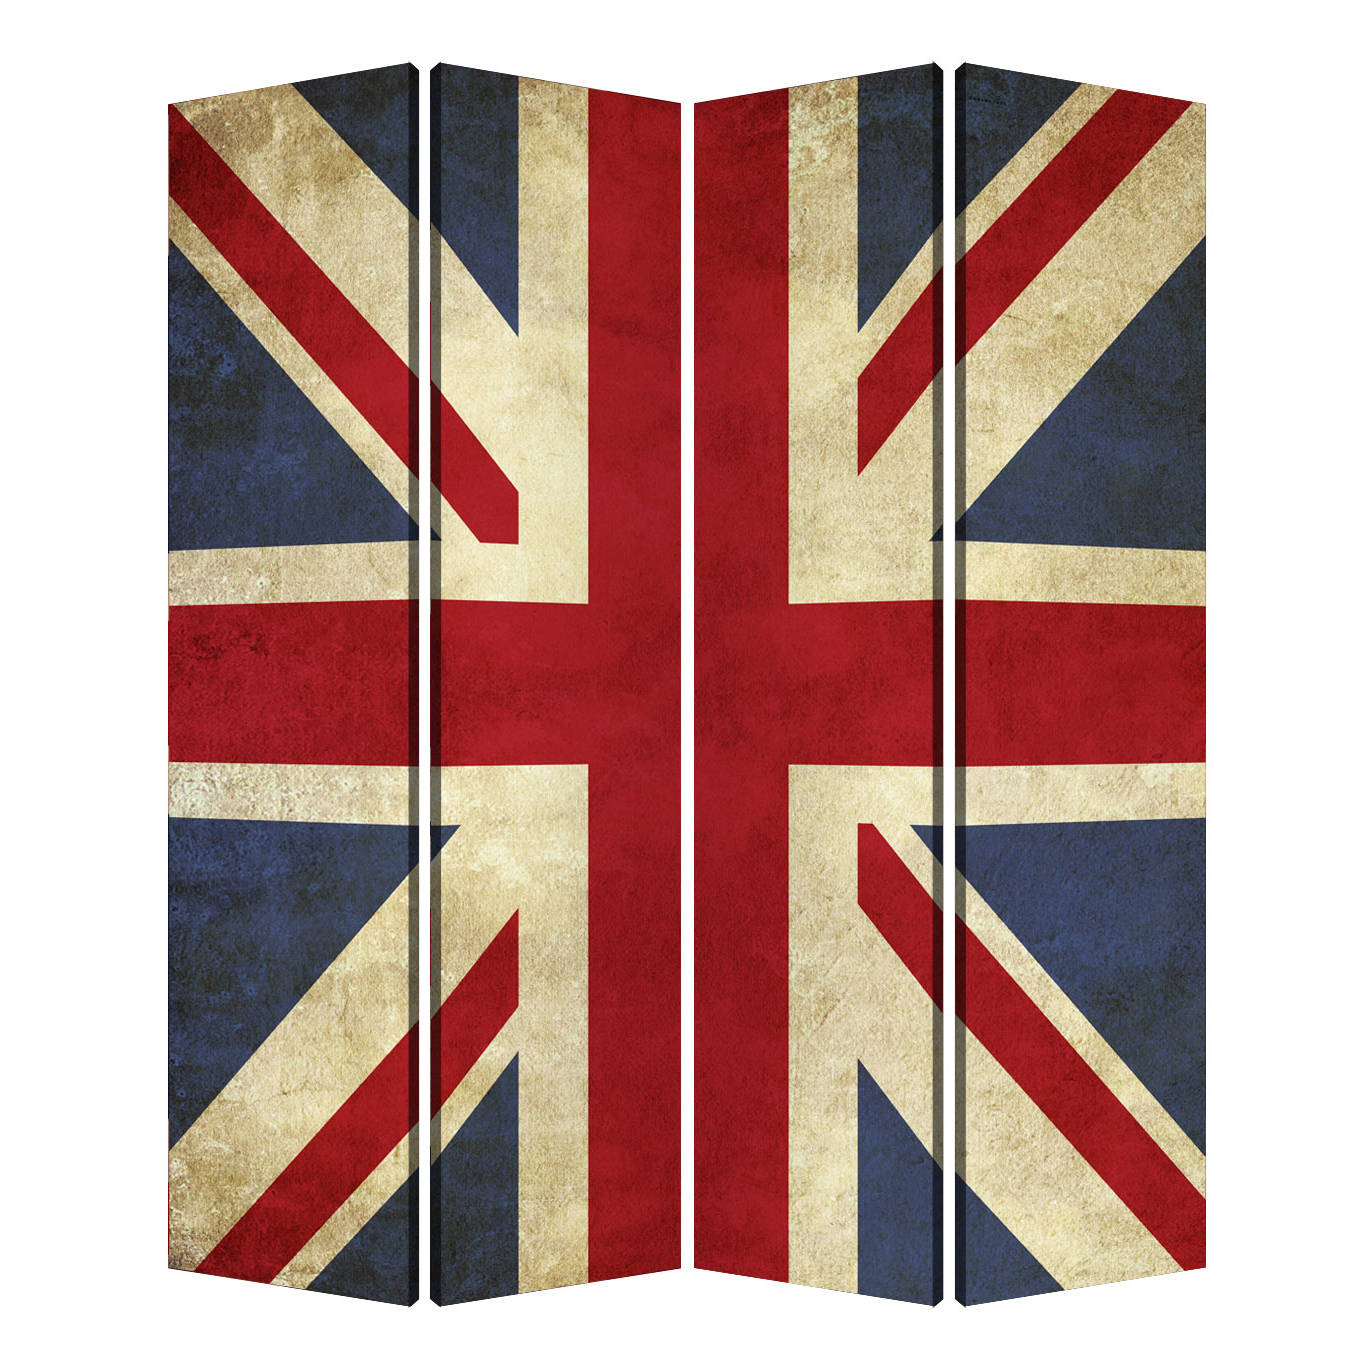 SCREEN GEMS FURNITURE ACCESSORIES Handmade Union Jack Printed Canvas Screen - image 1 of 2